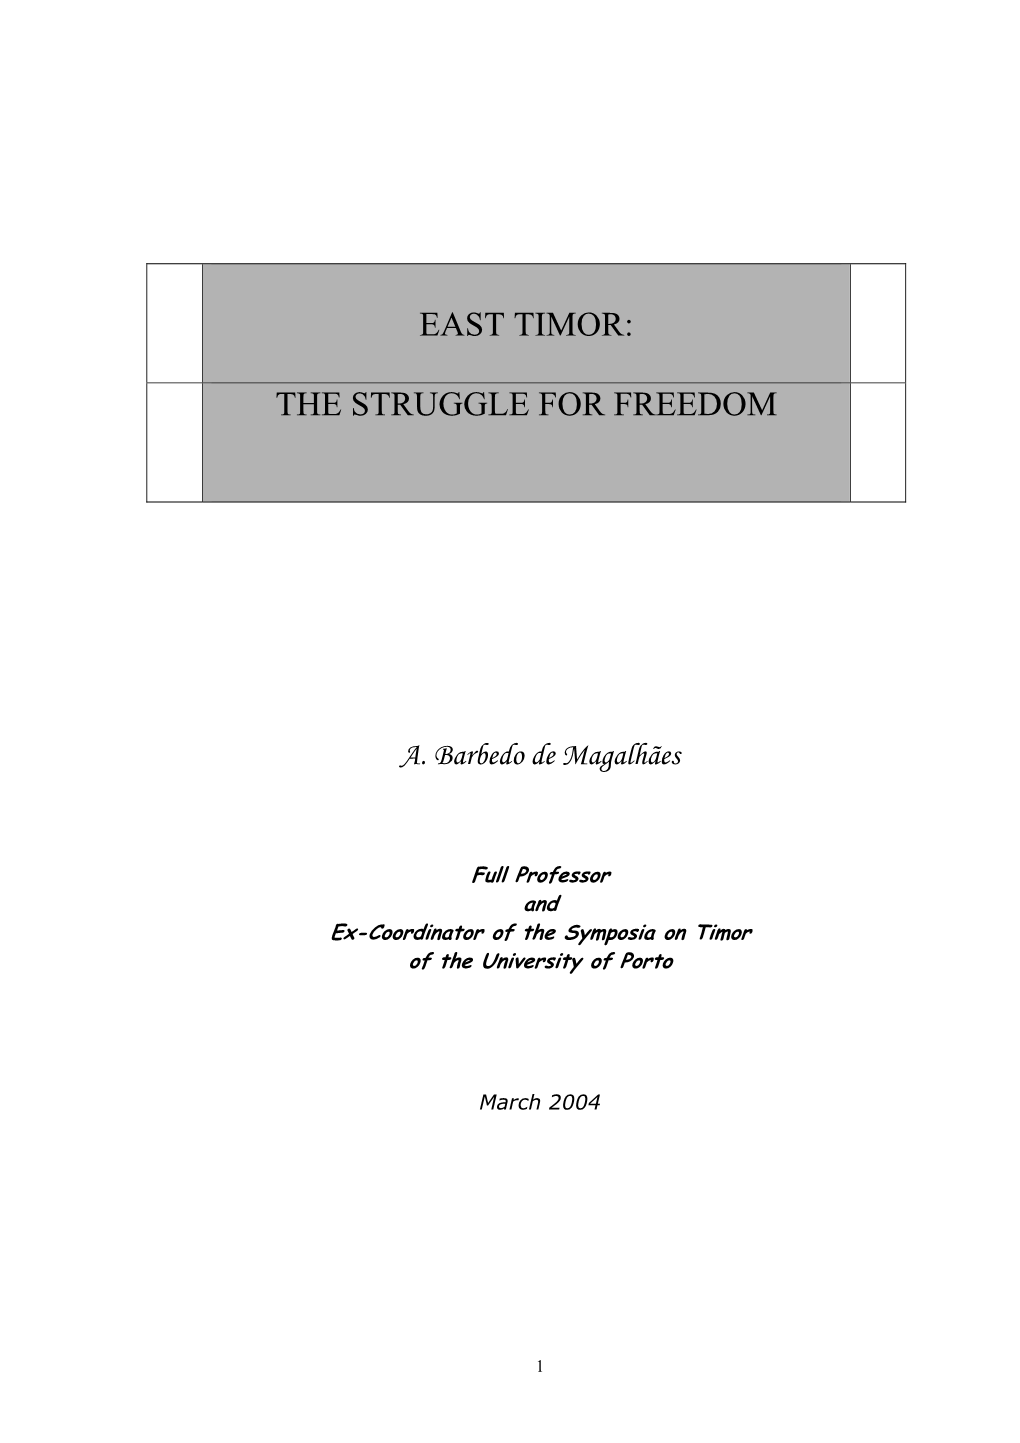 East Timor: the Struggle for Freedom